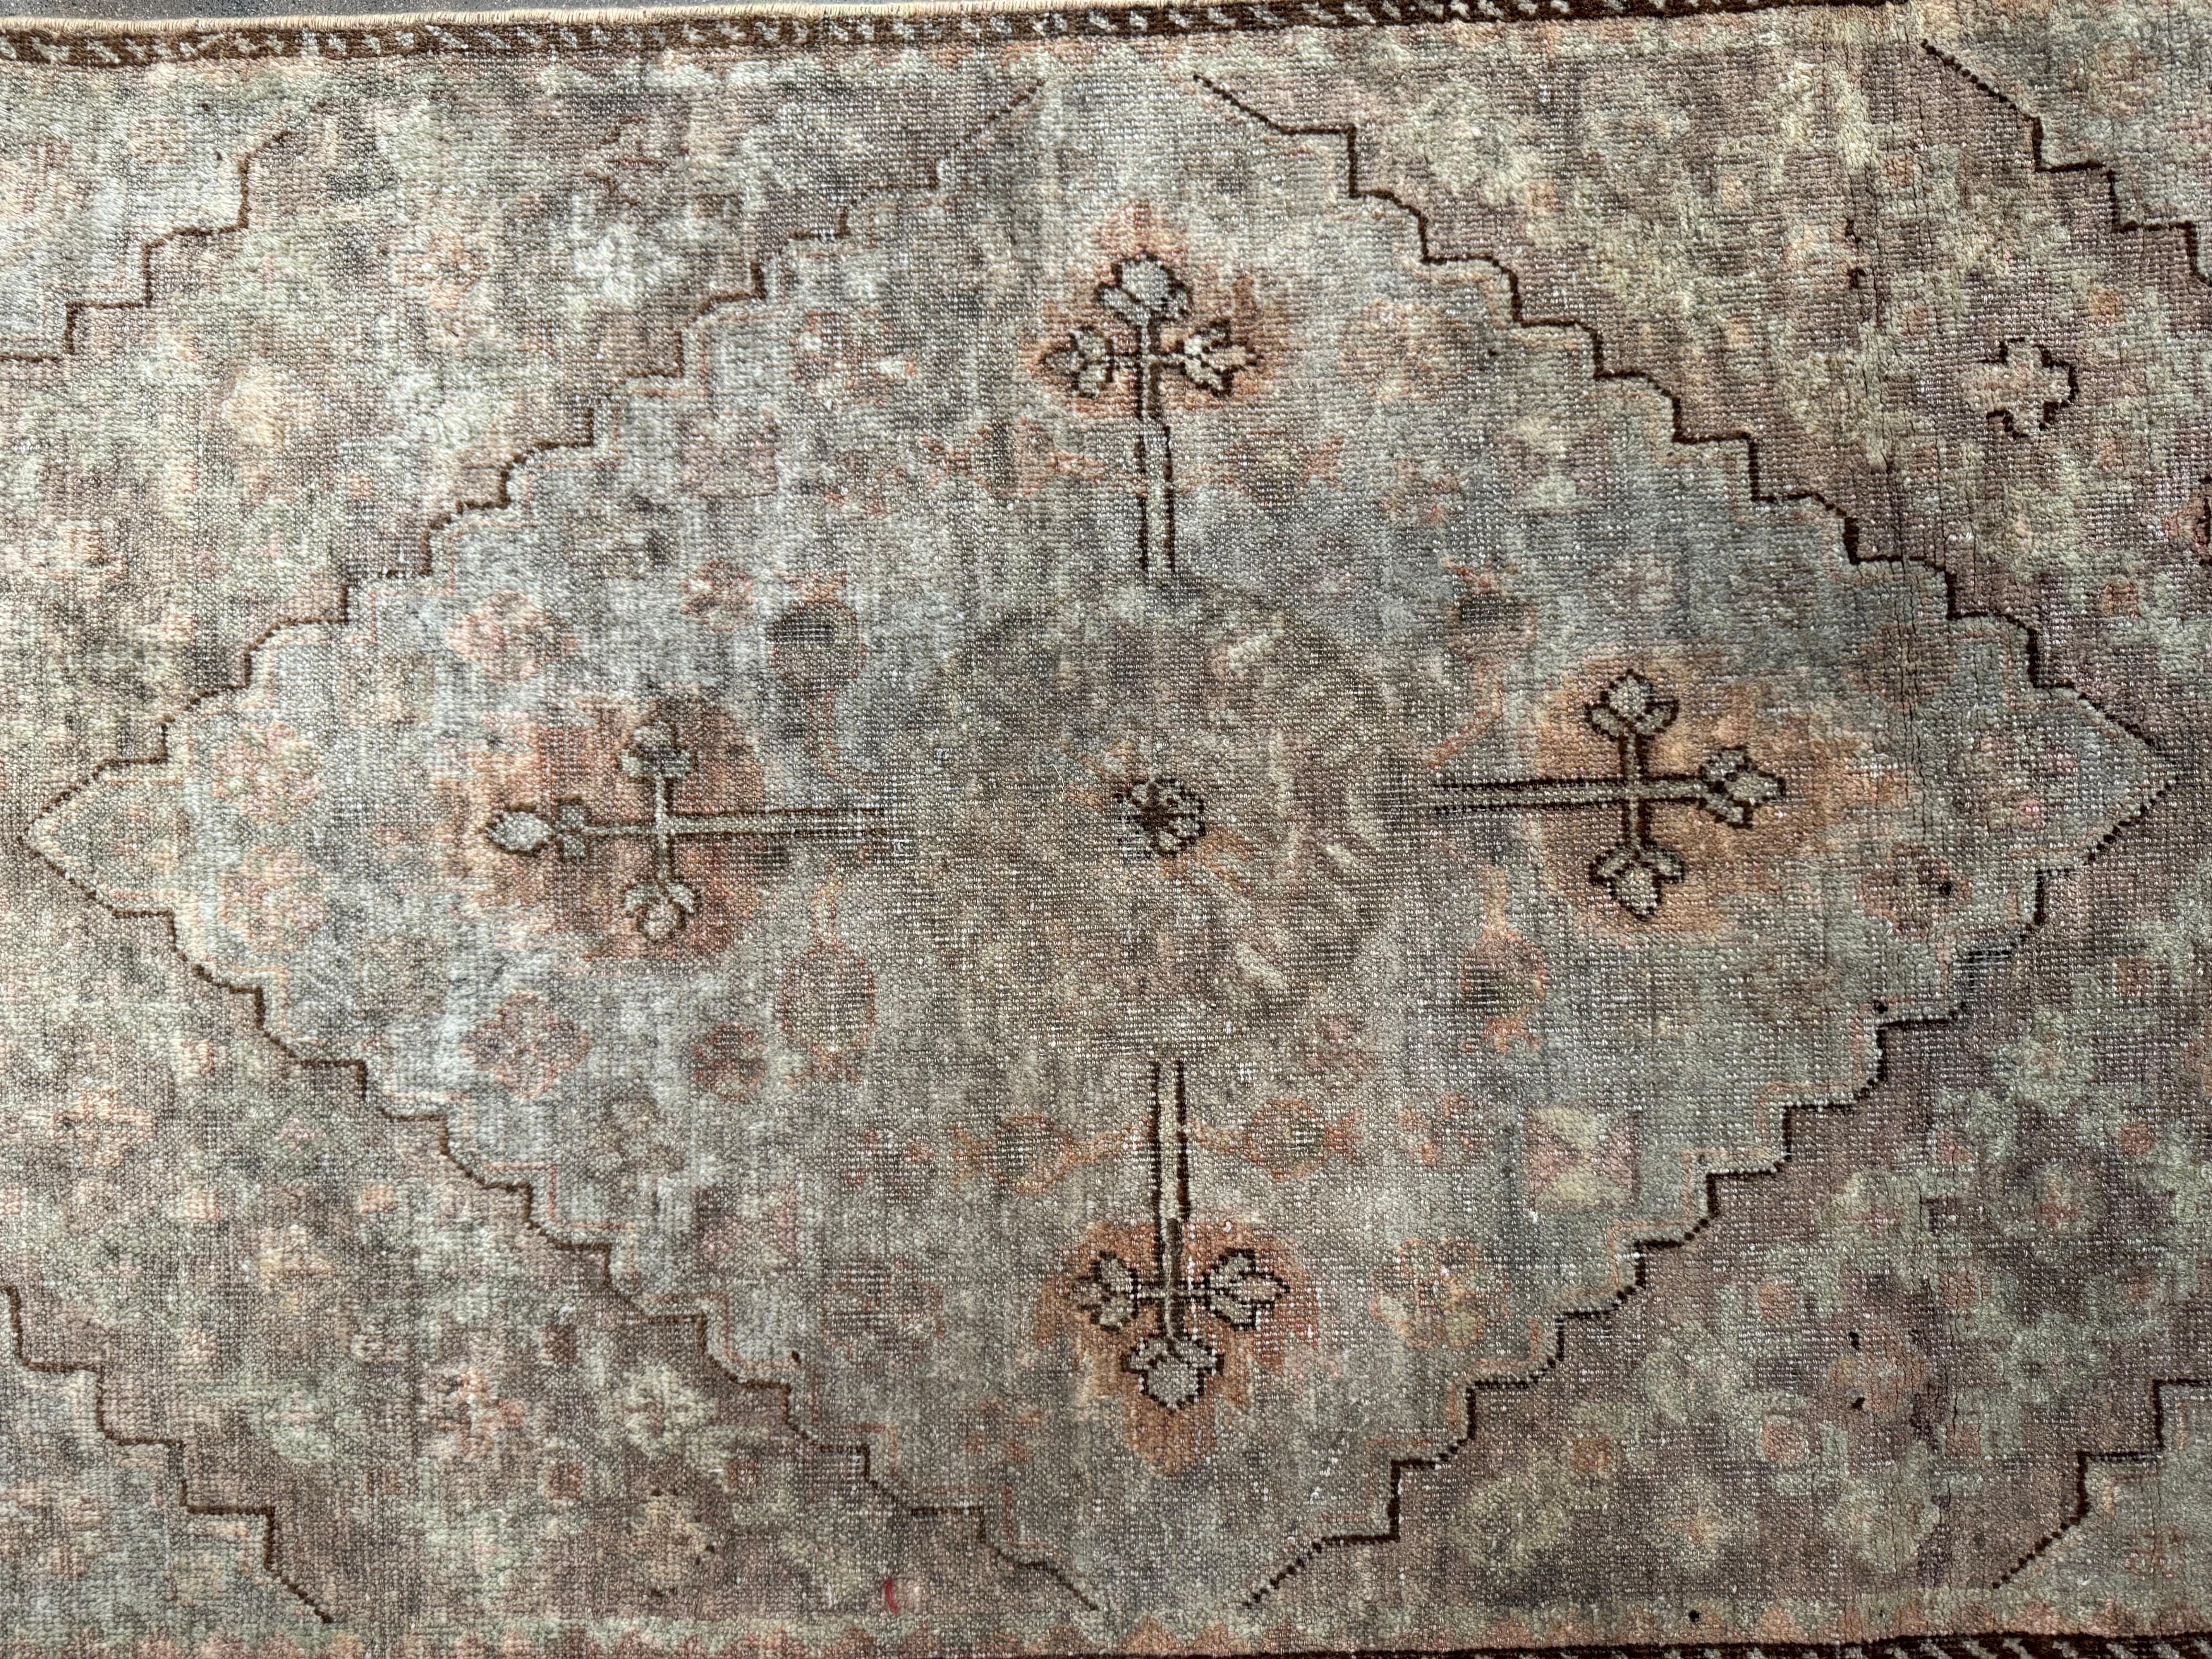 Discover the allure of this 19th-century Antique Samarkand Rug, sized at 6.8' x 2.9'. With its exquisite patterns and vibrant hues, this rug adds a touch of historic charm to any American space, blending tradition with elegance.